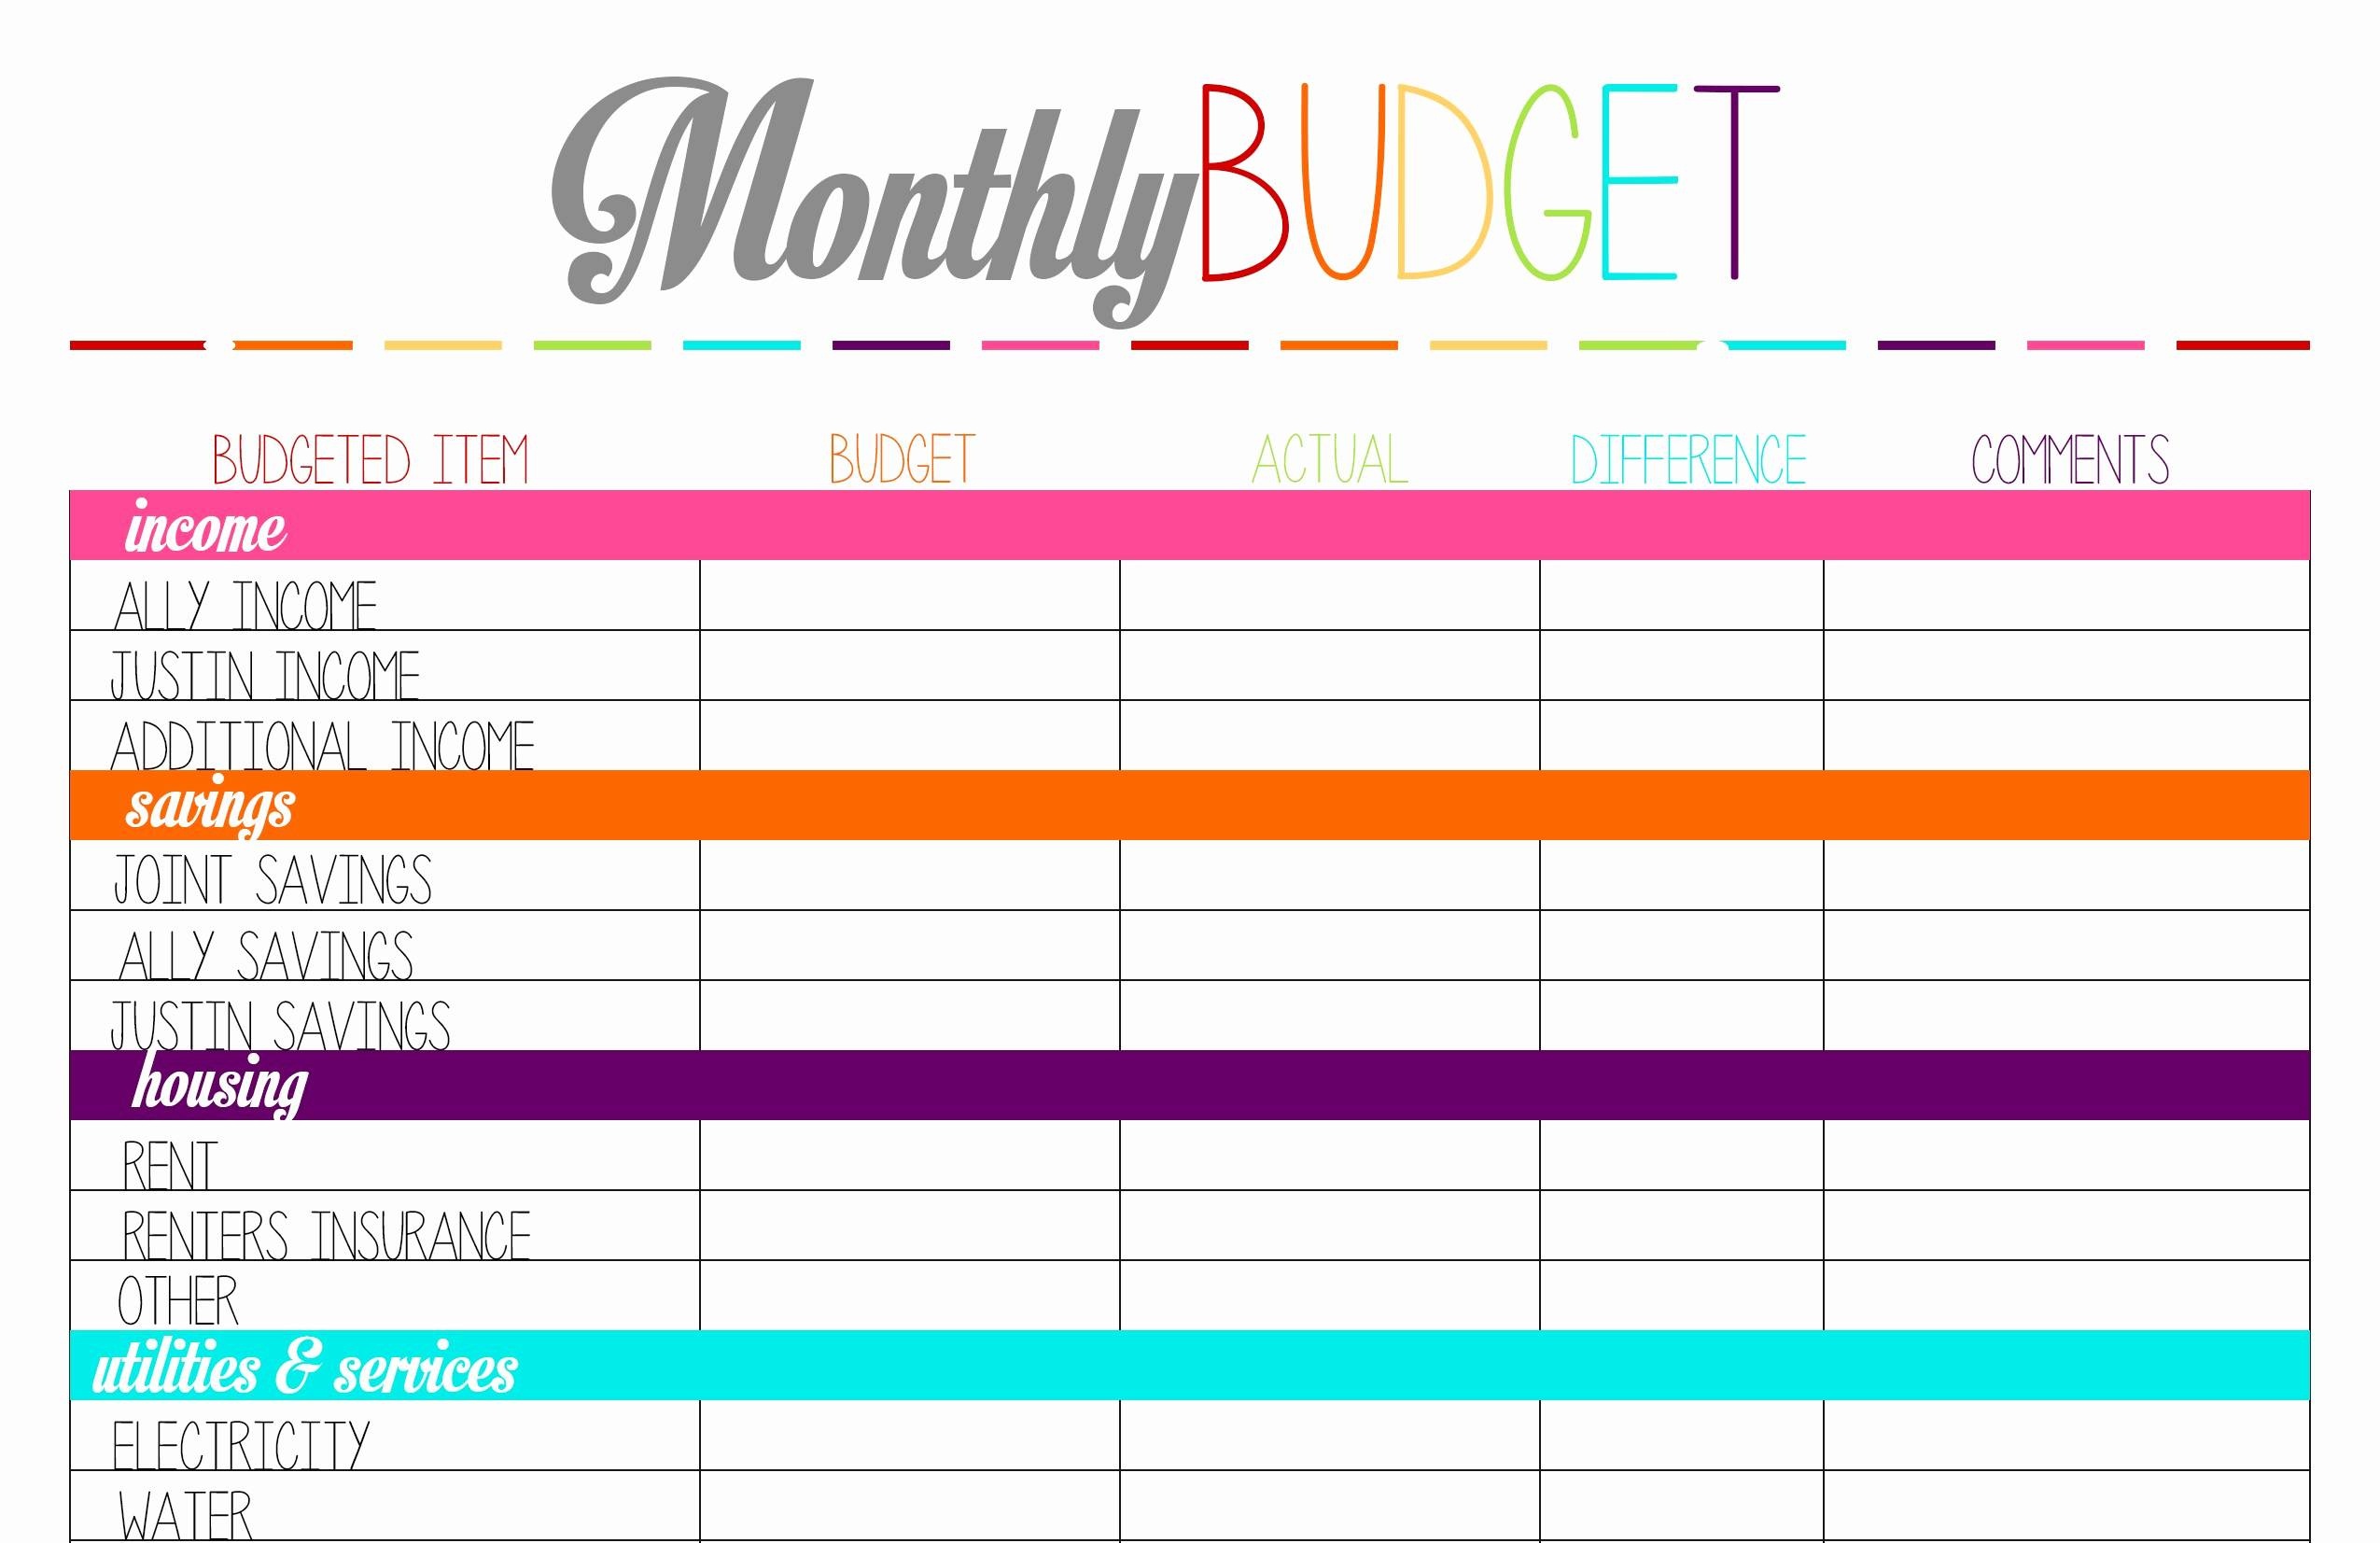 Free Printable Bill Organizer (79+ Images In Collection) Page 1 - Free Printable Bill Organizer